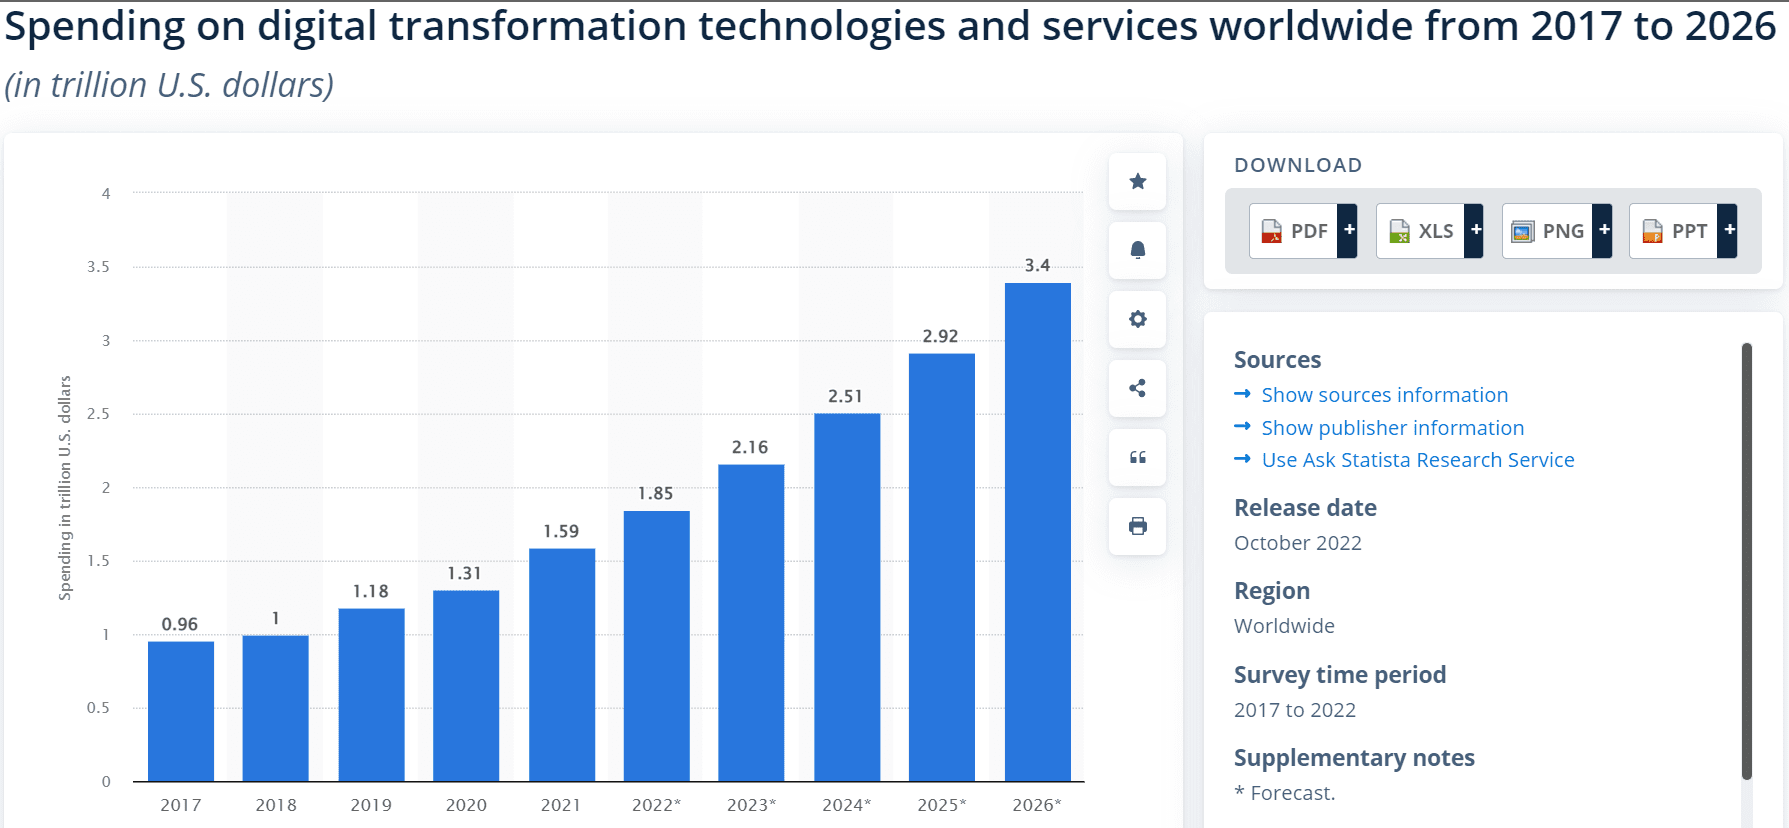 Spending on digital transformation technologies and services worldwide from 2017 to 2026